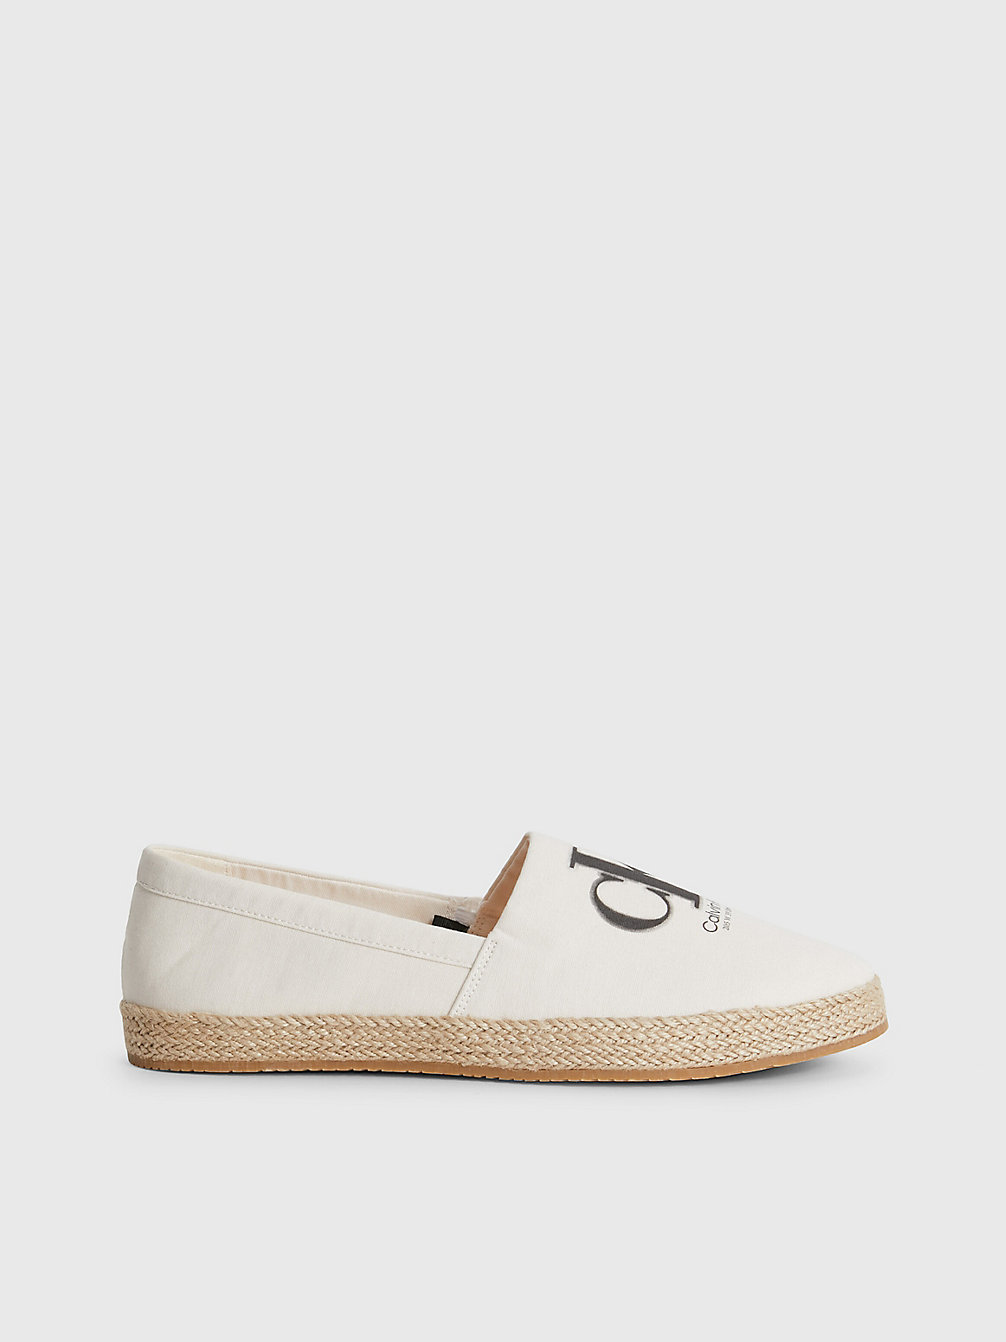 ANCIENT WHITE Recycled Canvas Espadrilles undefined men Calvin Klein